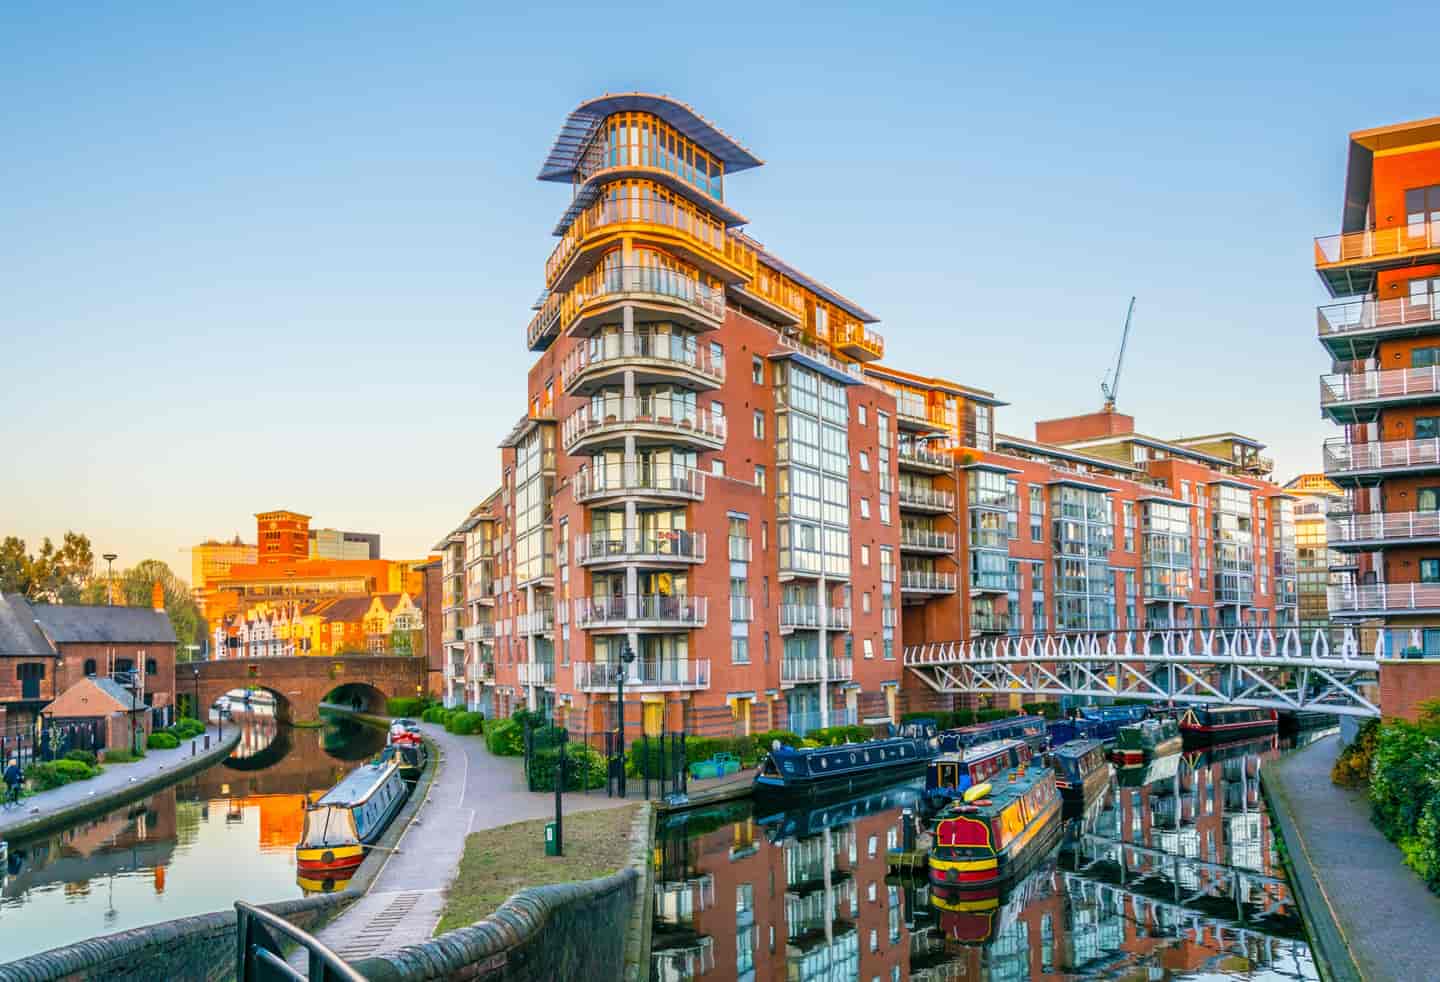 Student Accommodation in Birmingham - King Edwards Wharf by the Canalside